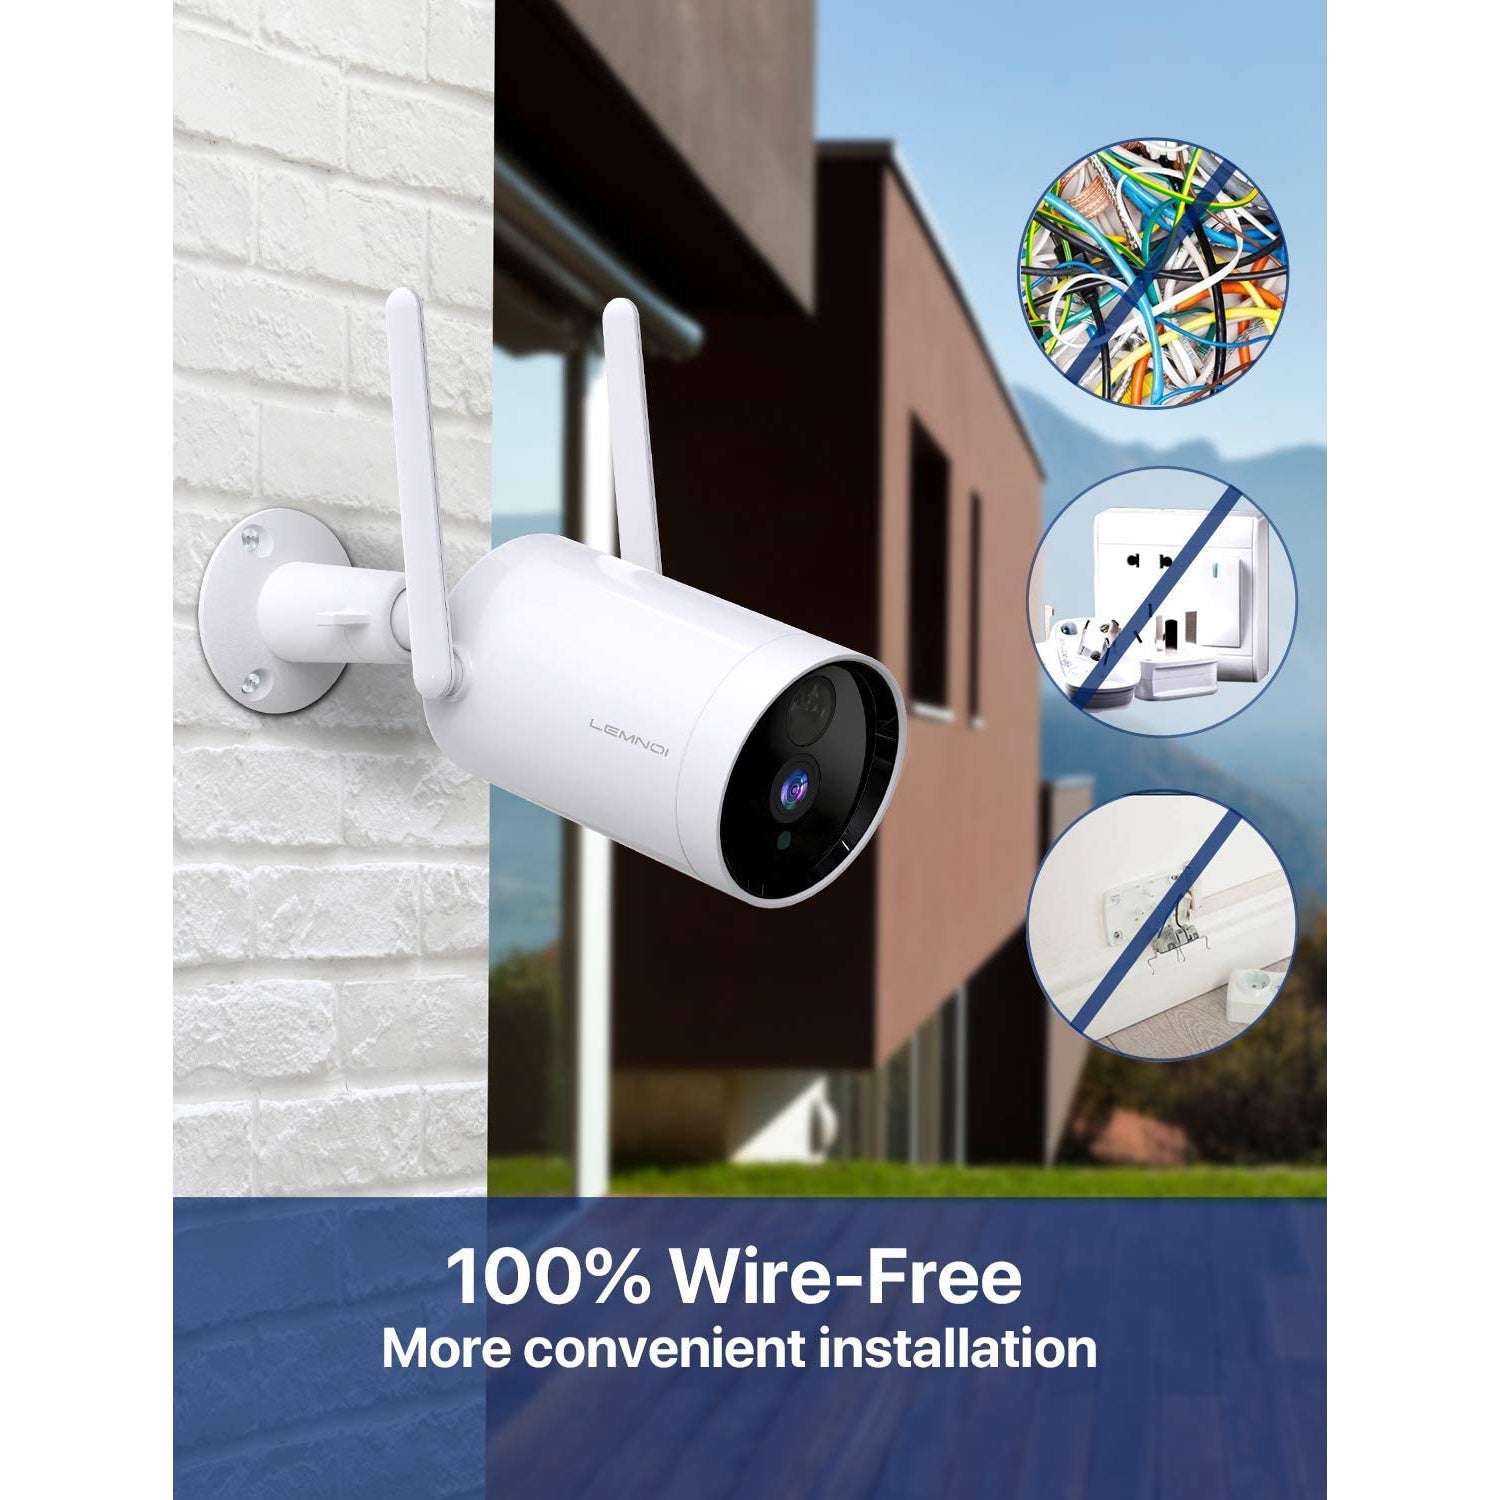 Lemnoi Security Camera Outdoor,10400mAh Rechargeable Battery Wireless Security Camera